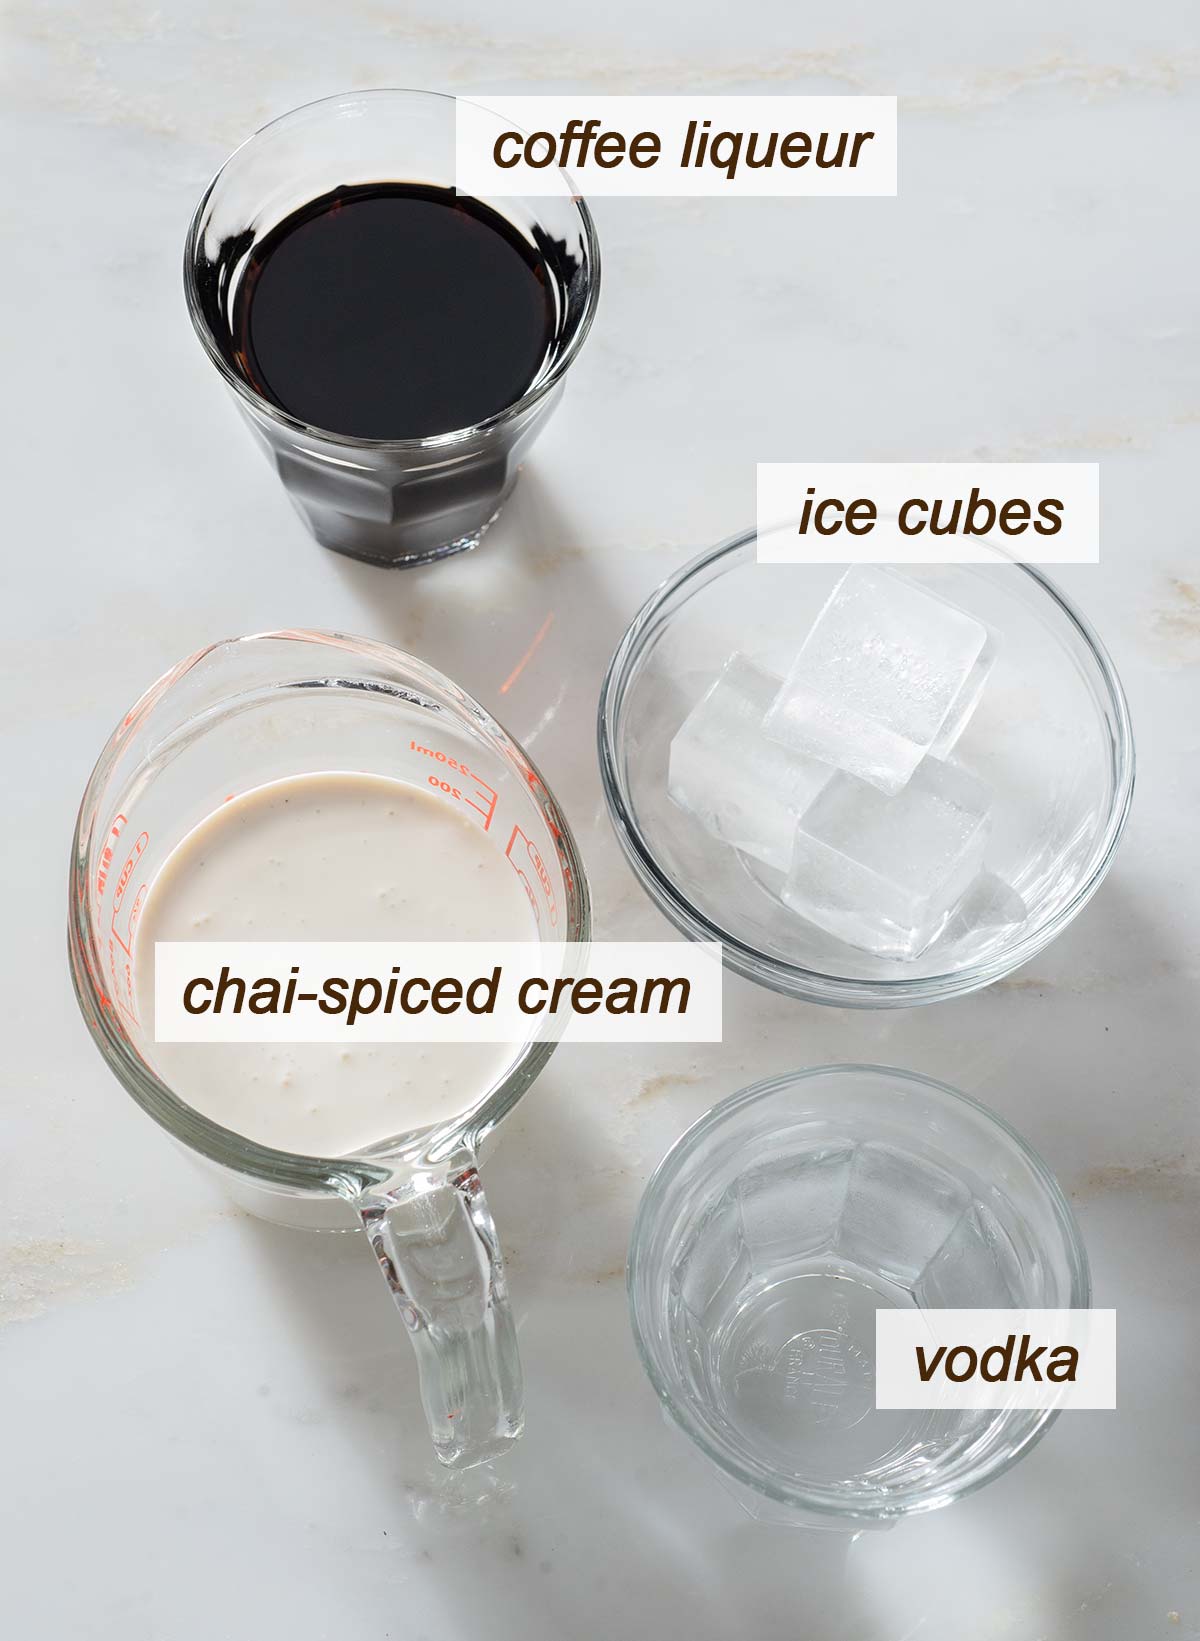 Chai white Russian ingredients on a table.